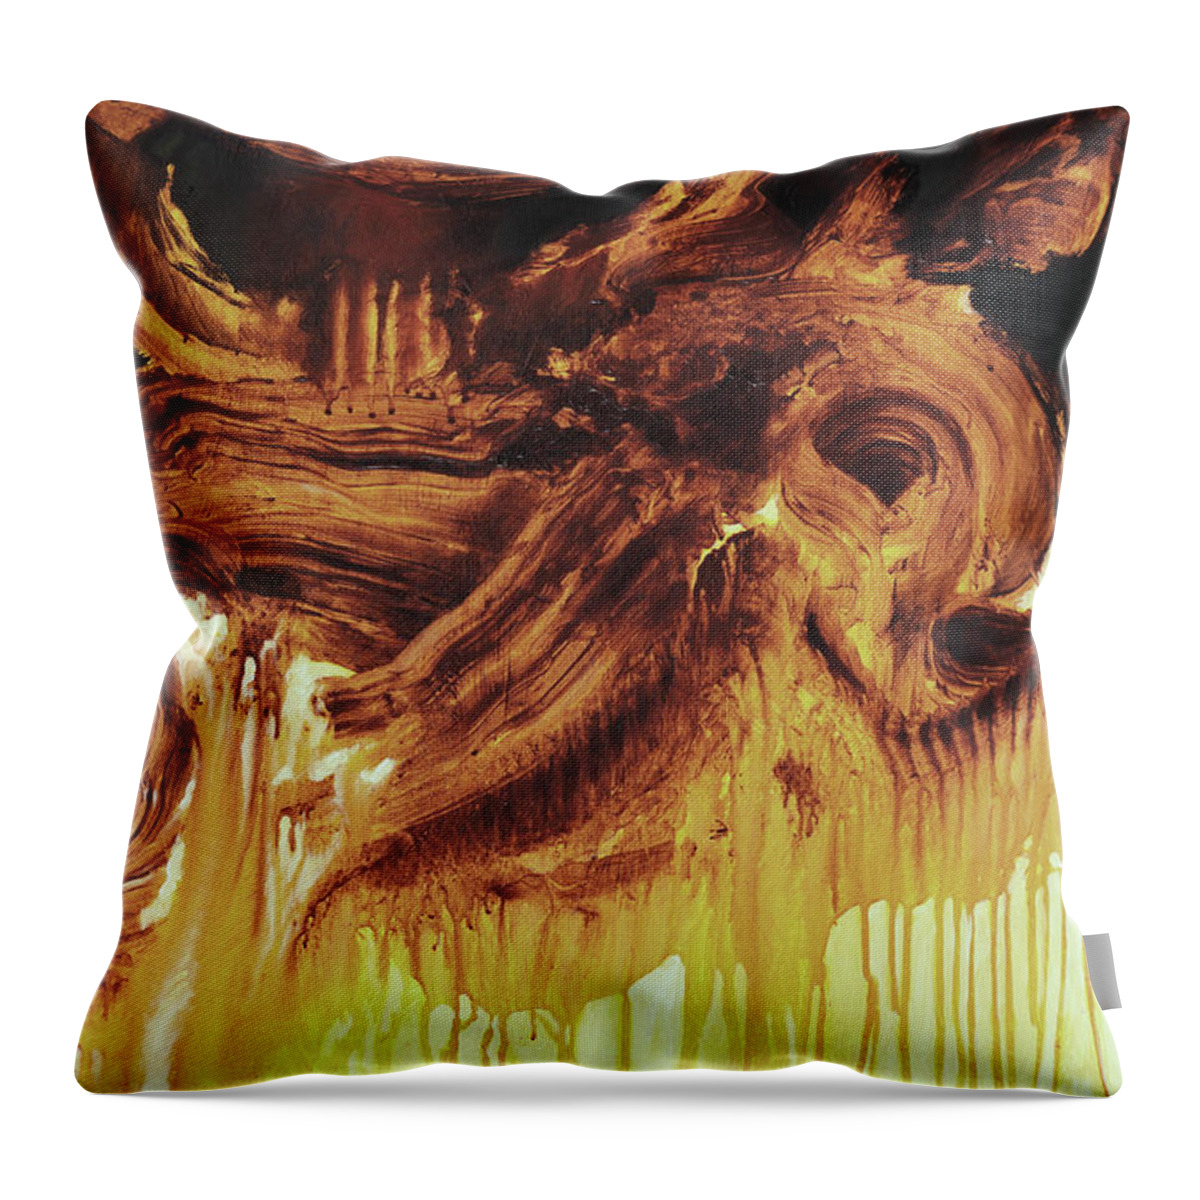 Roots Throw Pillow featuring the painting Roots of Life by Sv Bell